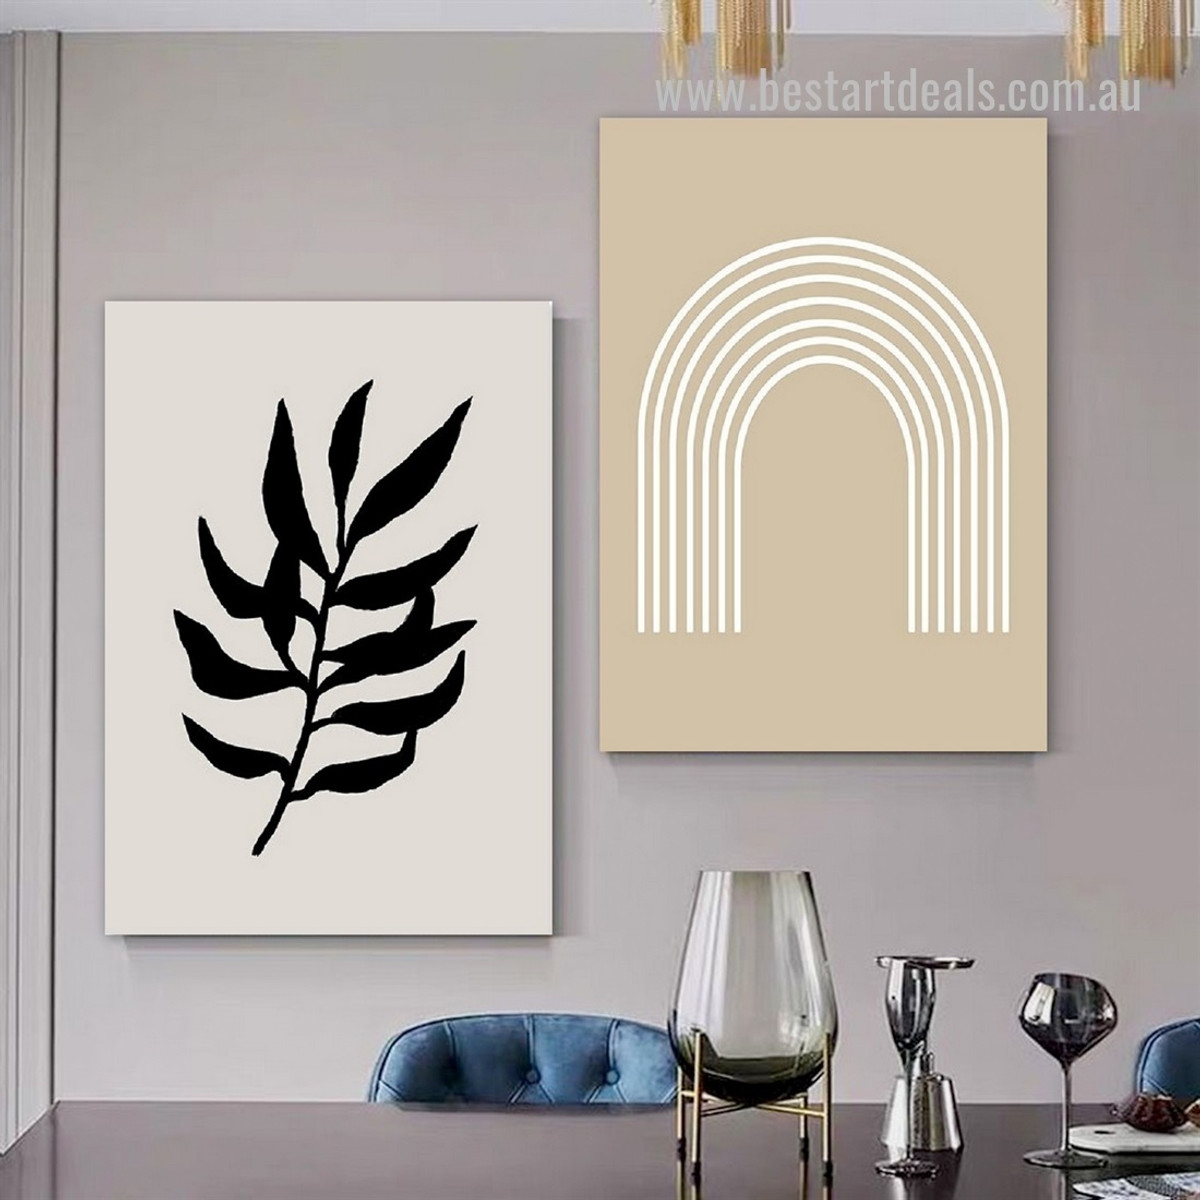 Meandering Alignment Curved Lines Scandinavian 2 Piece Framed Stretched Geometric Painting Photograph Abstract Canvas Print for Room Wall Decoration